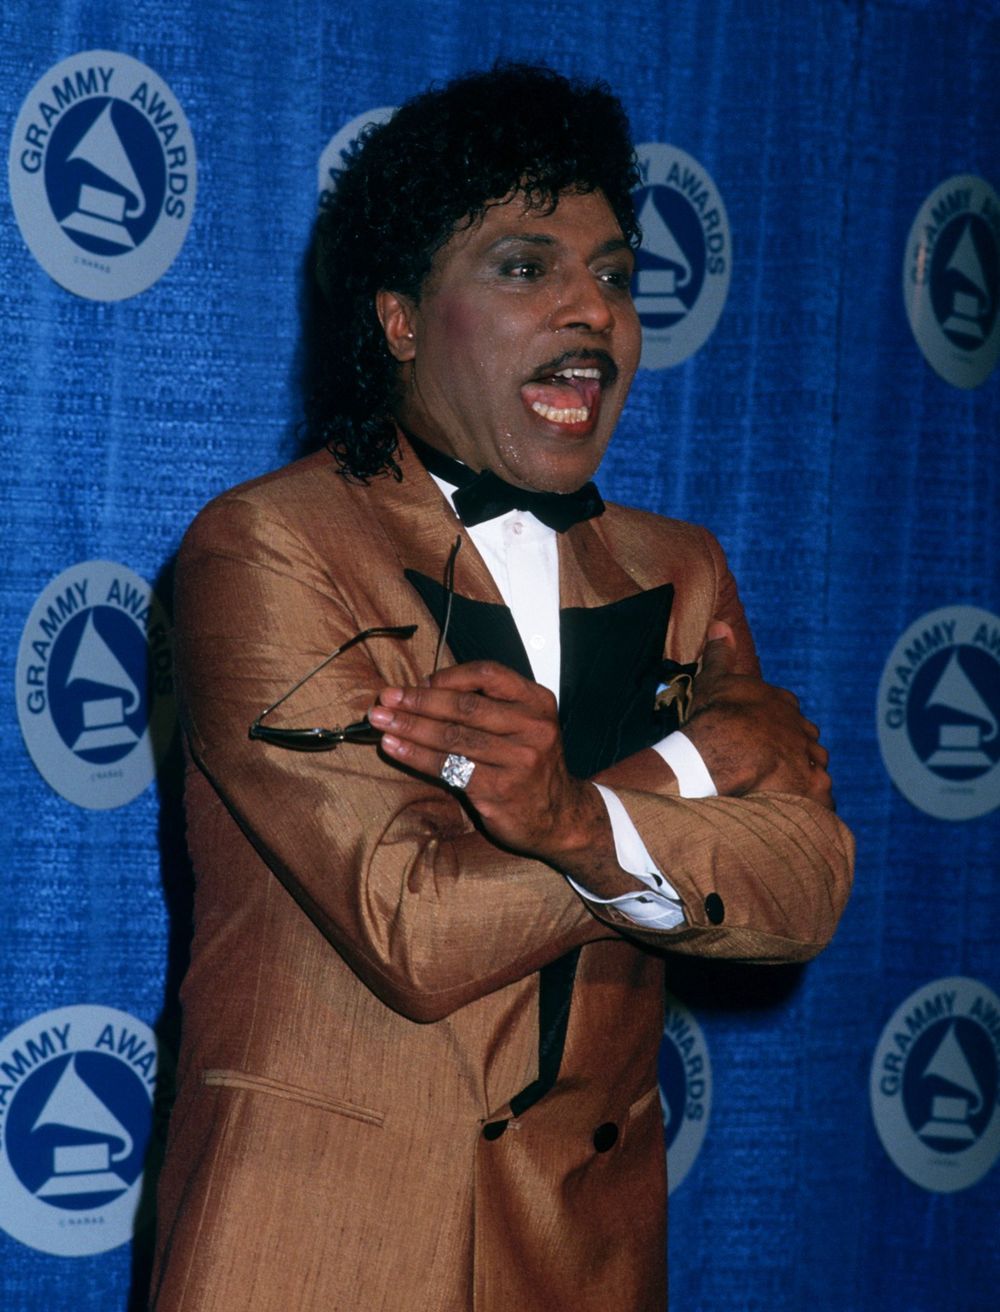 The Night Little Richard Reminded America He Was the True King of Rock